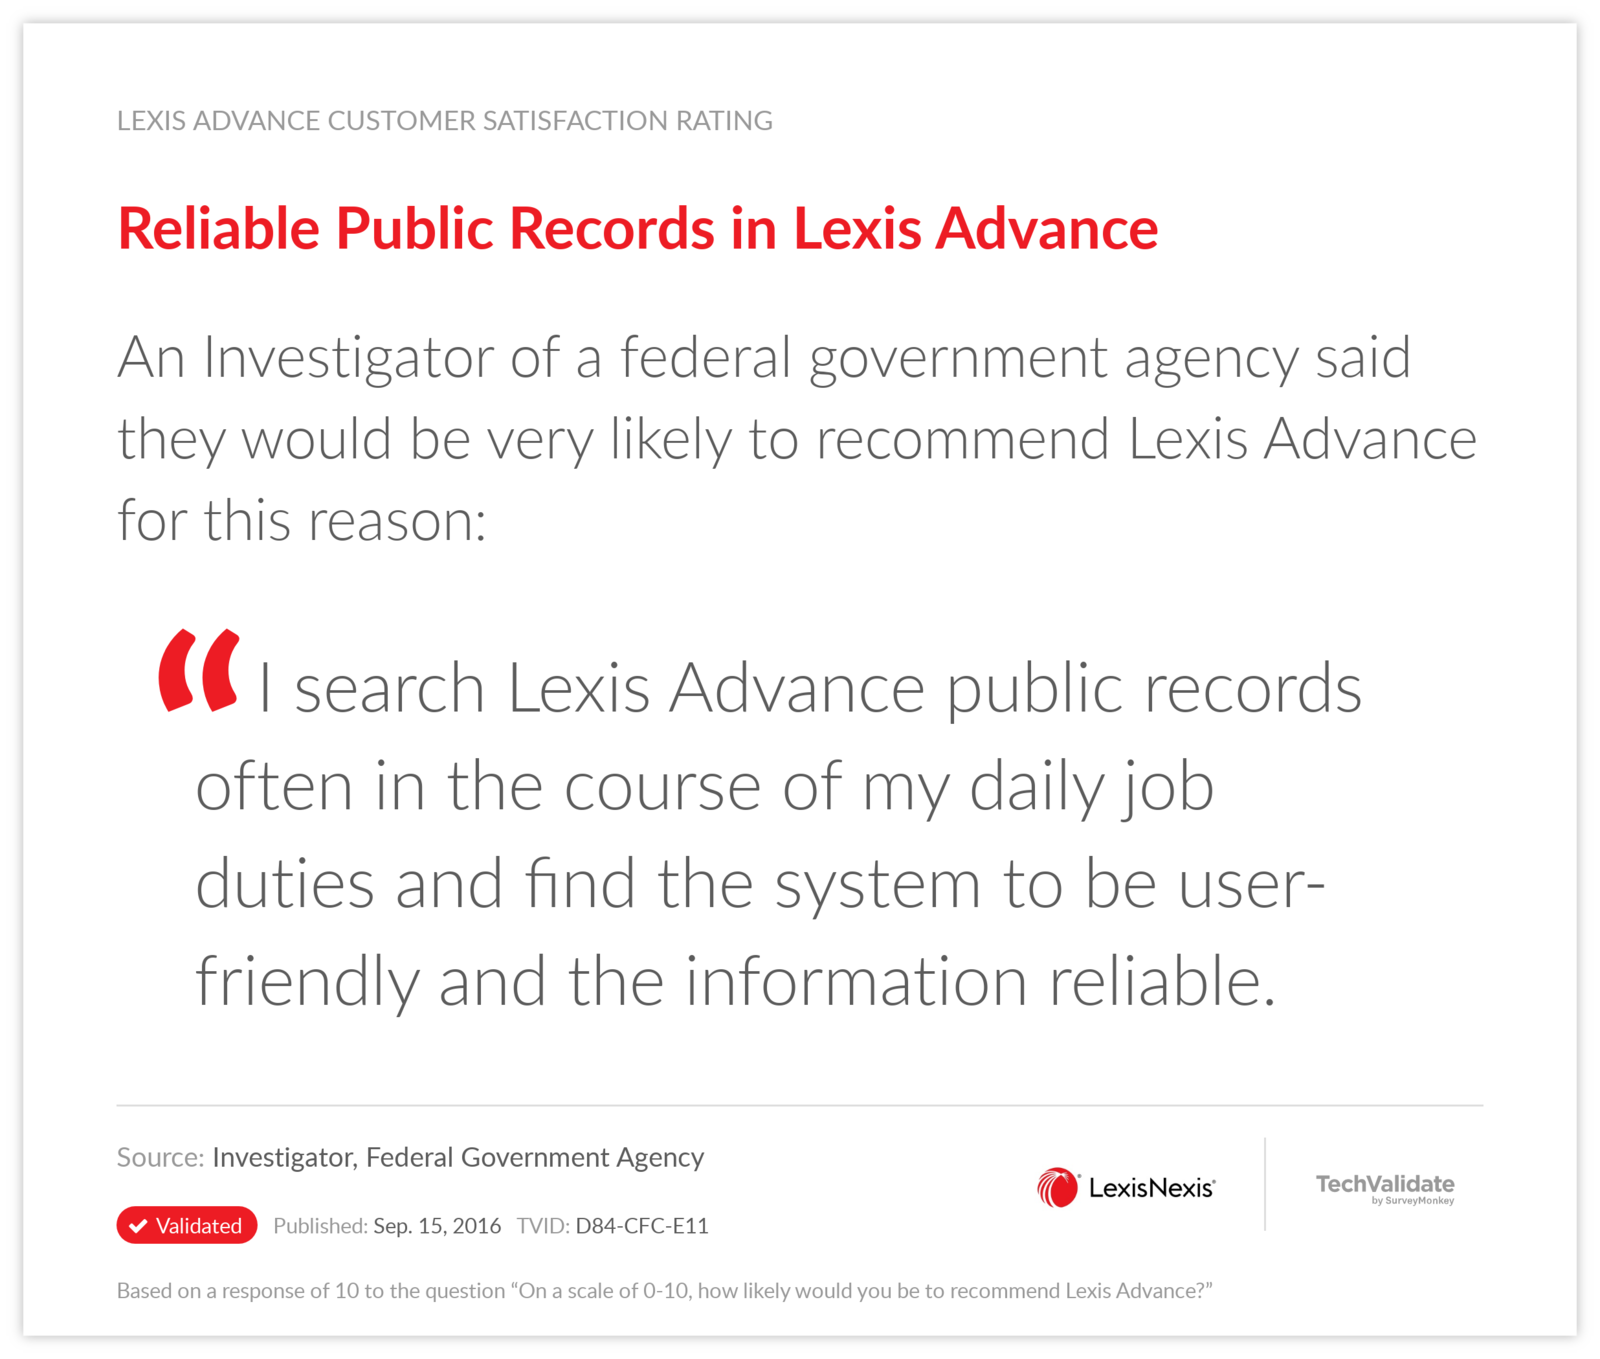 Reliable Public Records in Lexis Advance